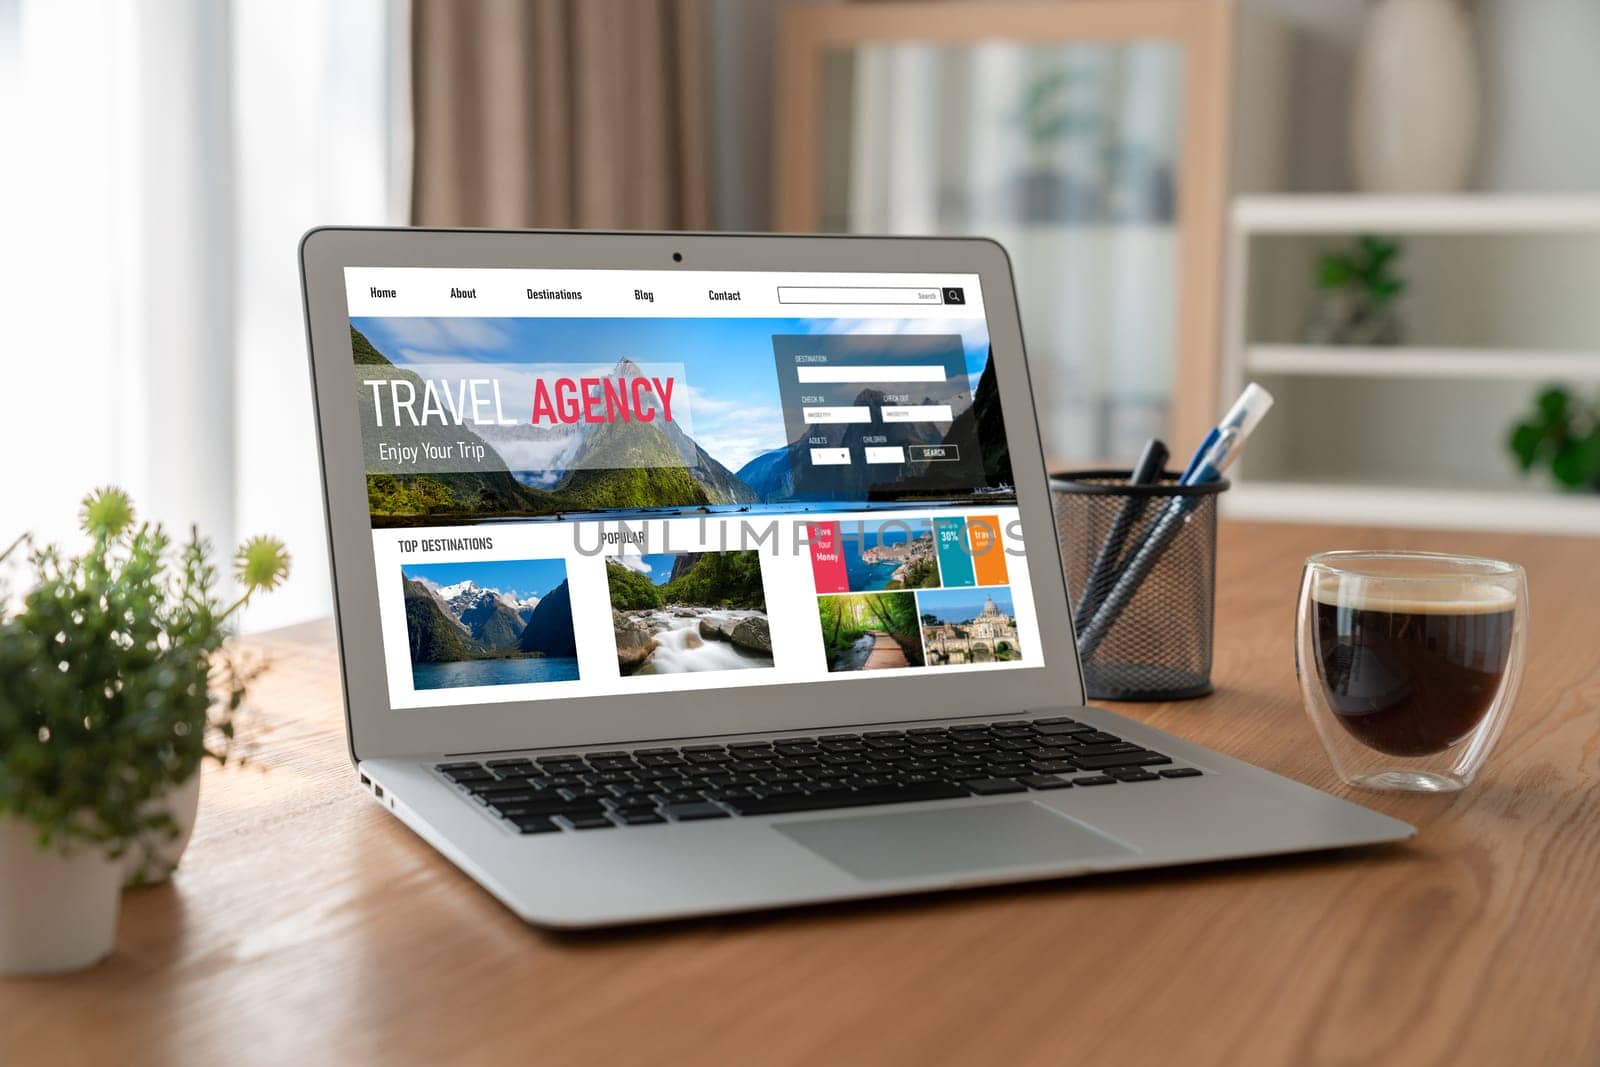 Online travel agency website for modish search and travel planning by biancoblue